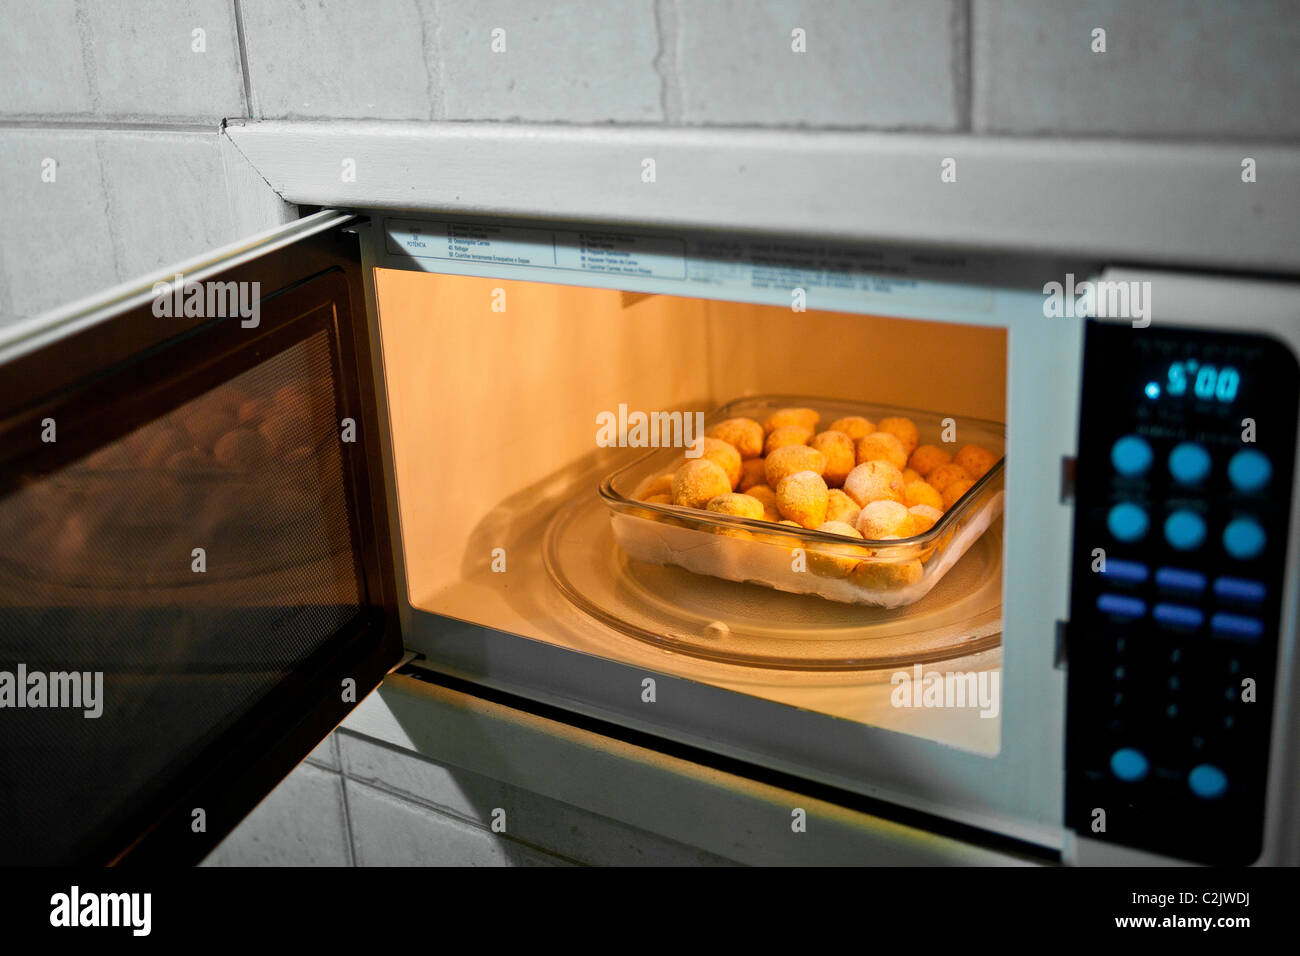 Canapes to be unfrozen in a microwave oven. Stock Photo